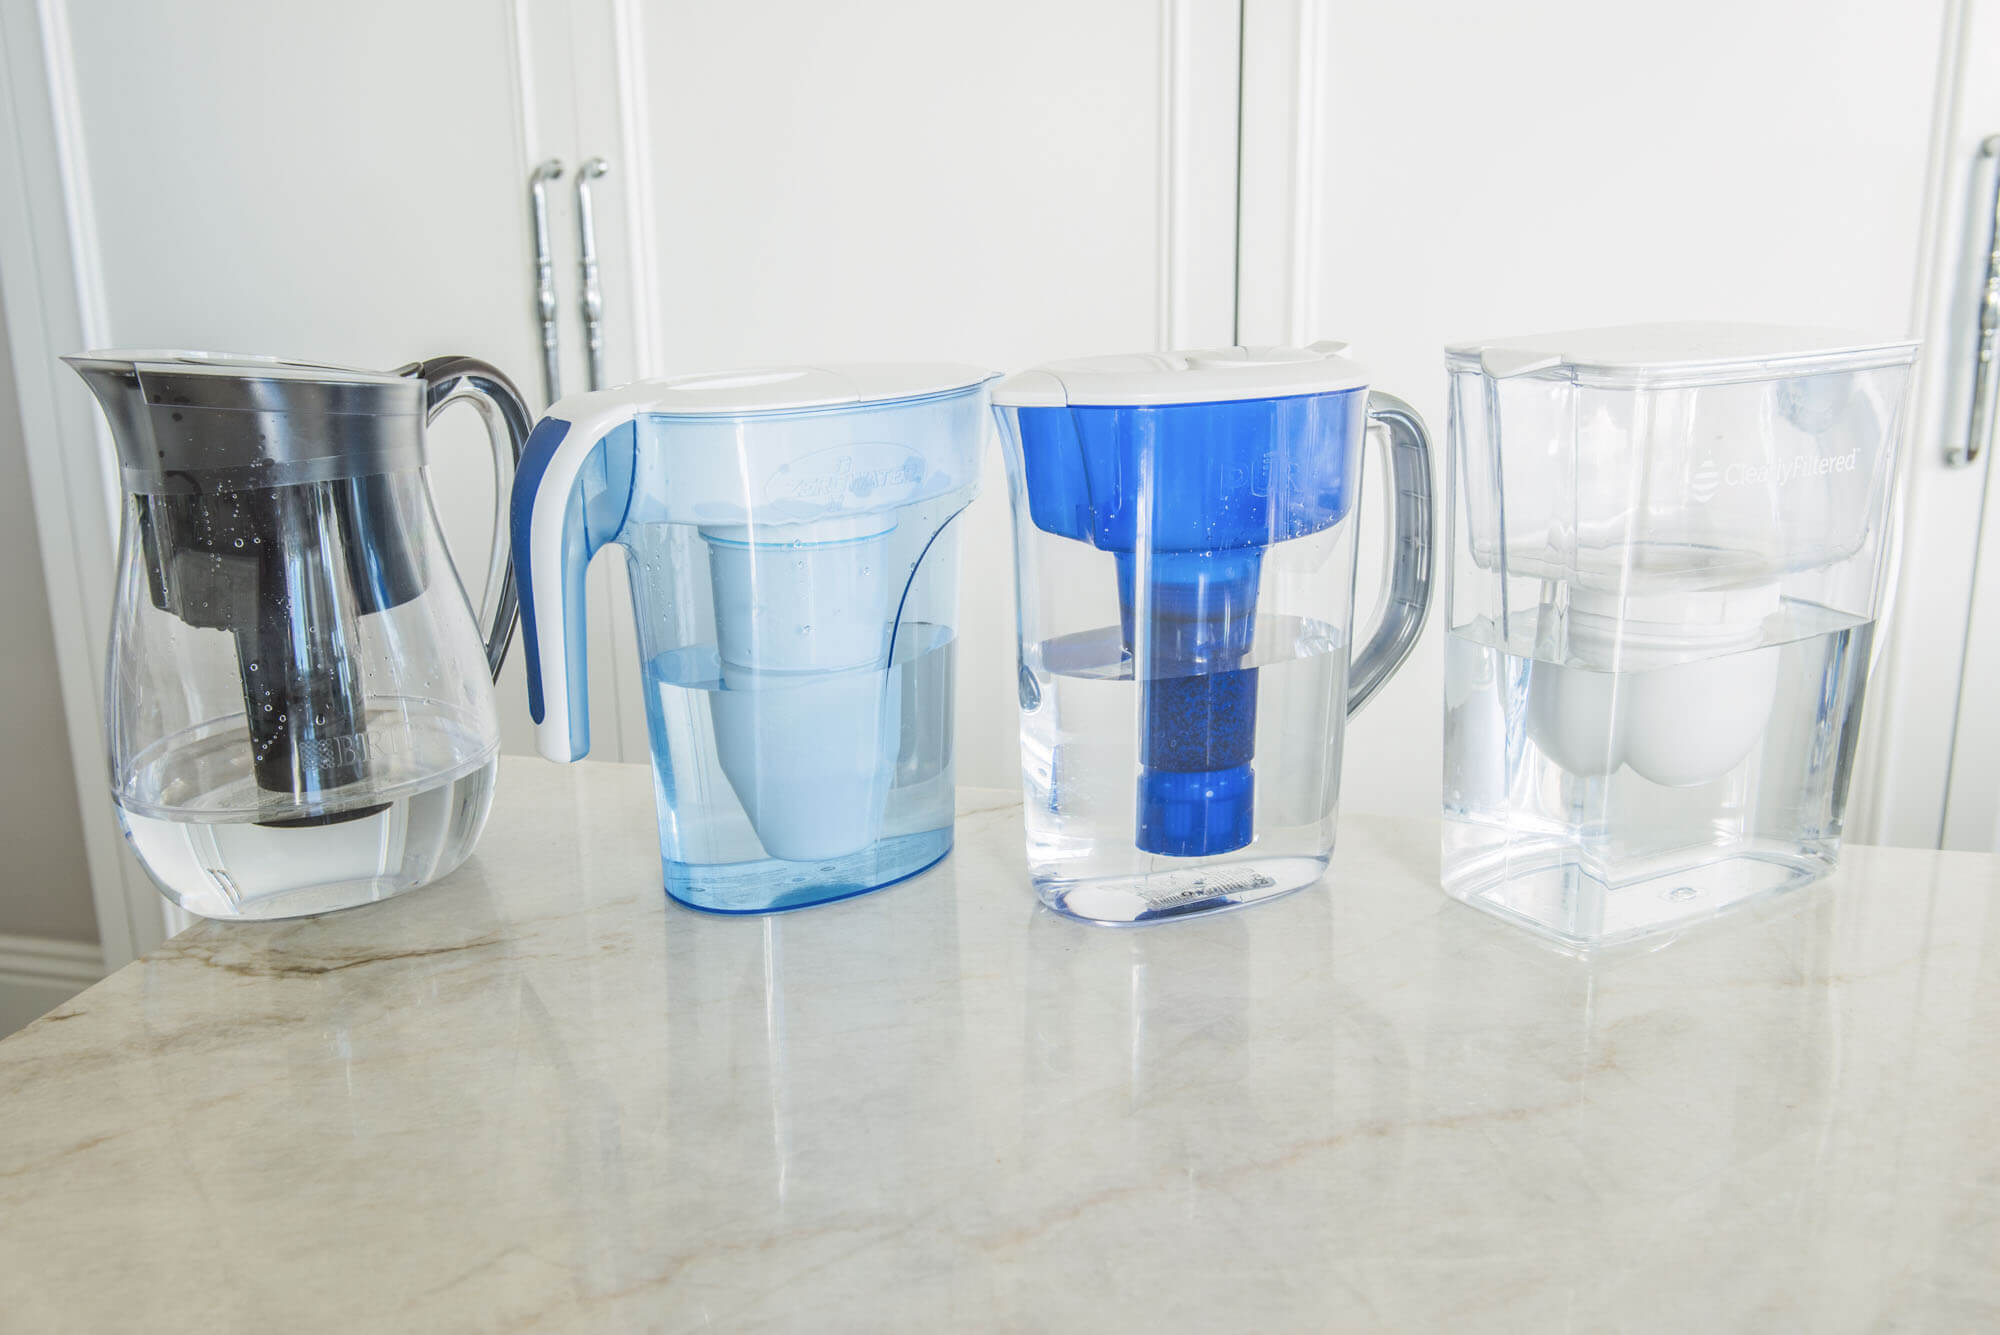 Brita water filter pitchers are on sale at